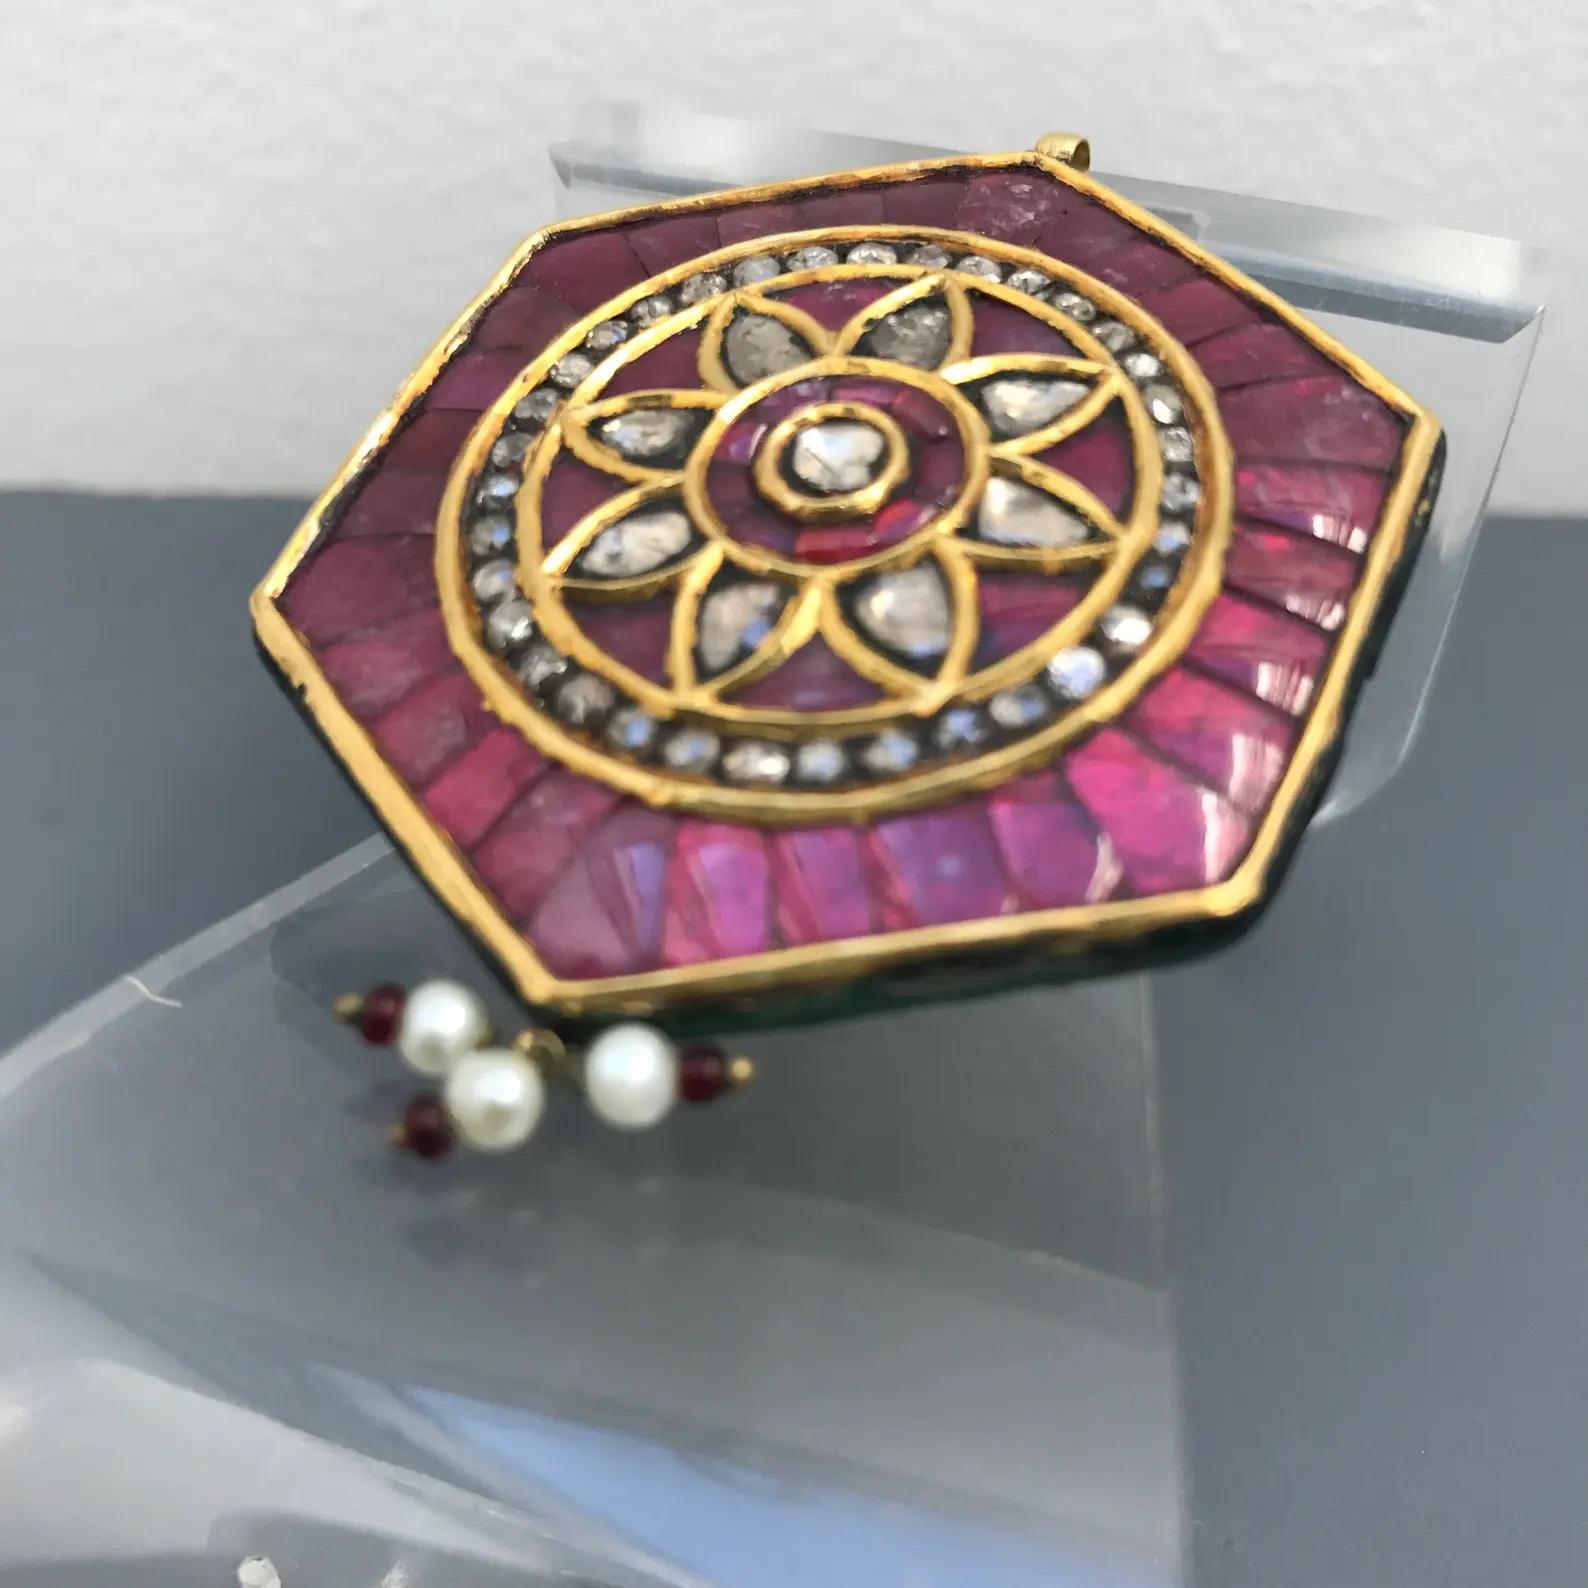 ABSOLUTELY STUNNING  LARGE  Mughal / Mogul  18kt gold pendant with genuine irregular size rose cut diamonds and ruby insert . Pendant back is also very beautifully made with multi colored enamel work .
These type of Mughal jewelry is usually wax